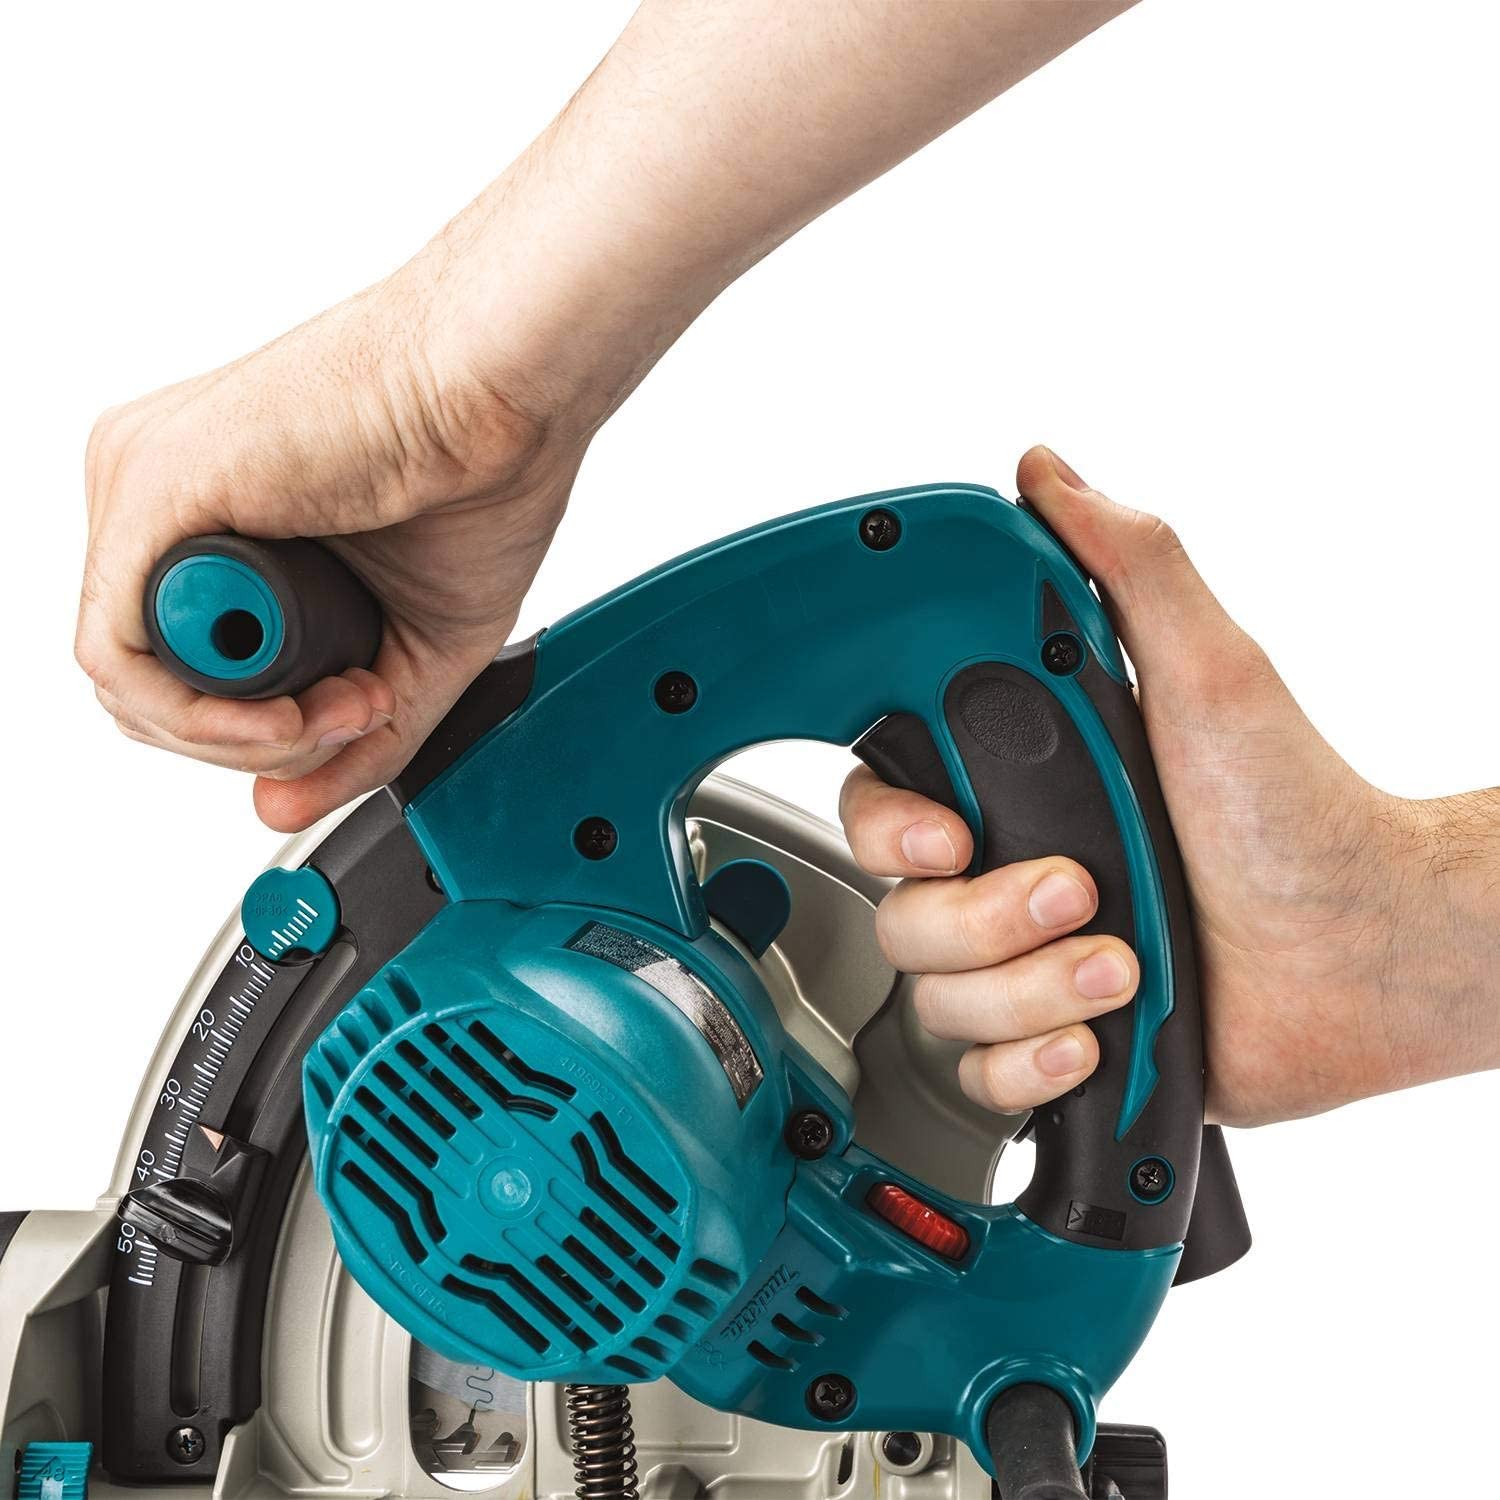 Makita Plunge Saw 110v MAKSP6000K1L | The motor has soft start for optimum control, along with electronic speed control and a constant speed circuit to keep performance consistent while under load. | toolforce.ie